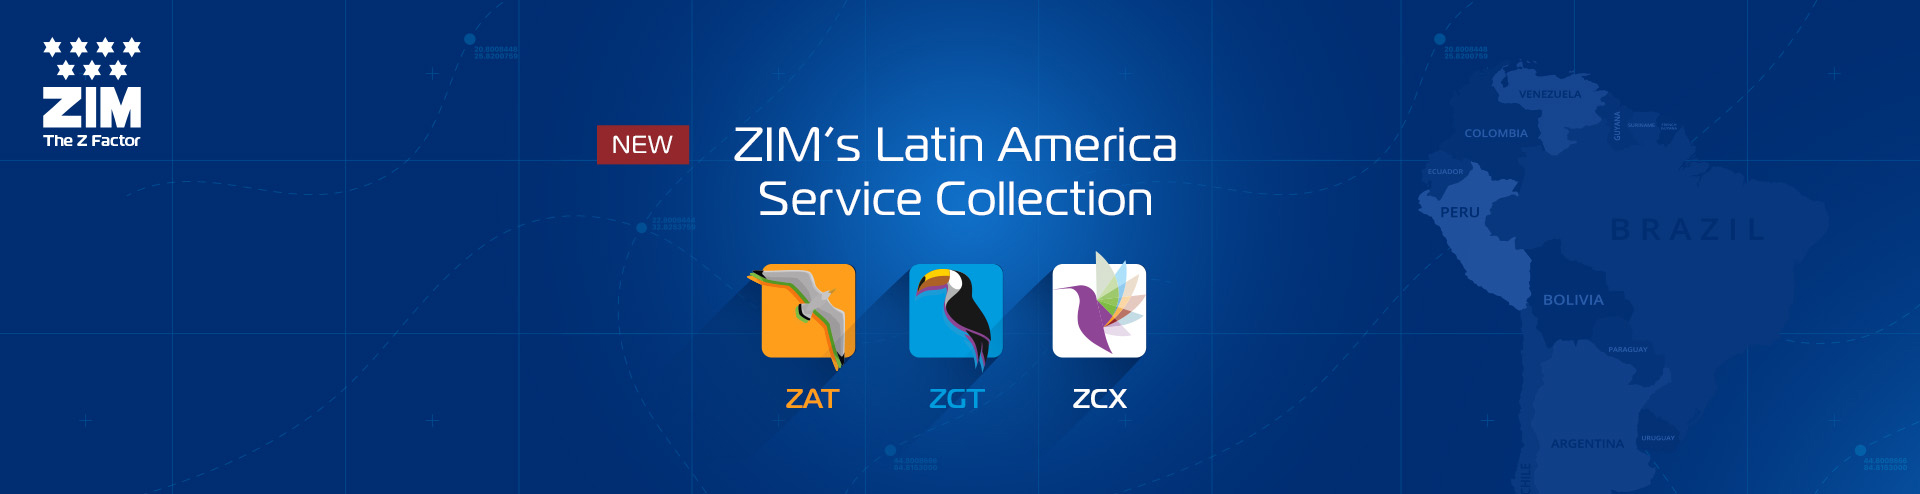 Introducing ZIM's Latin America new collection of services